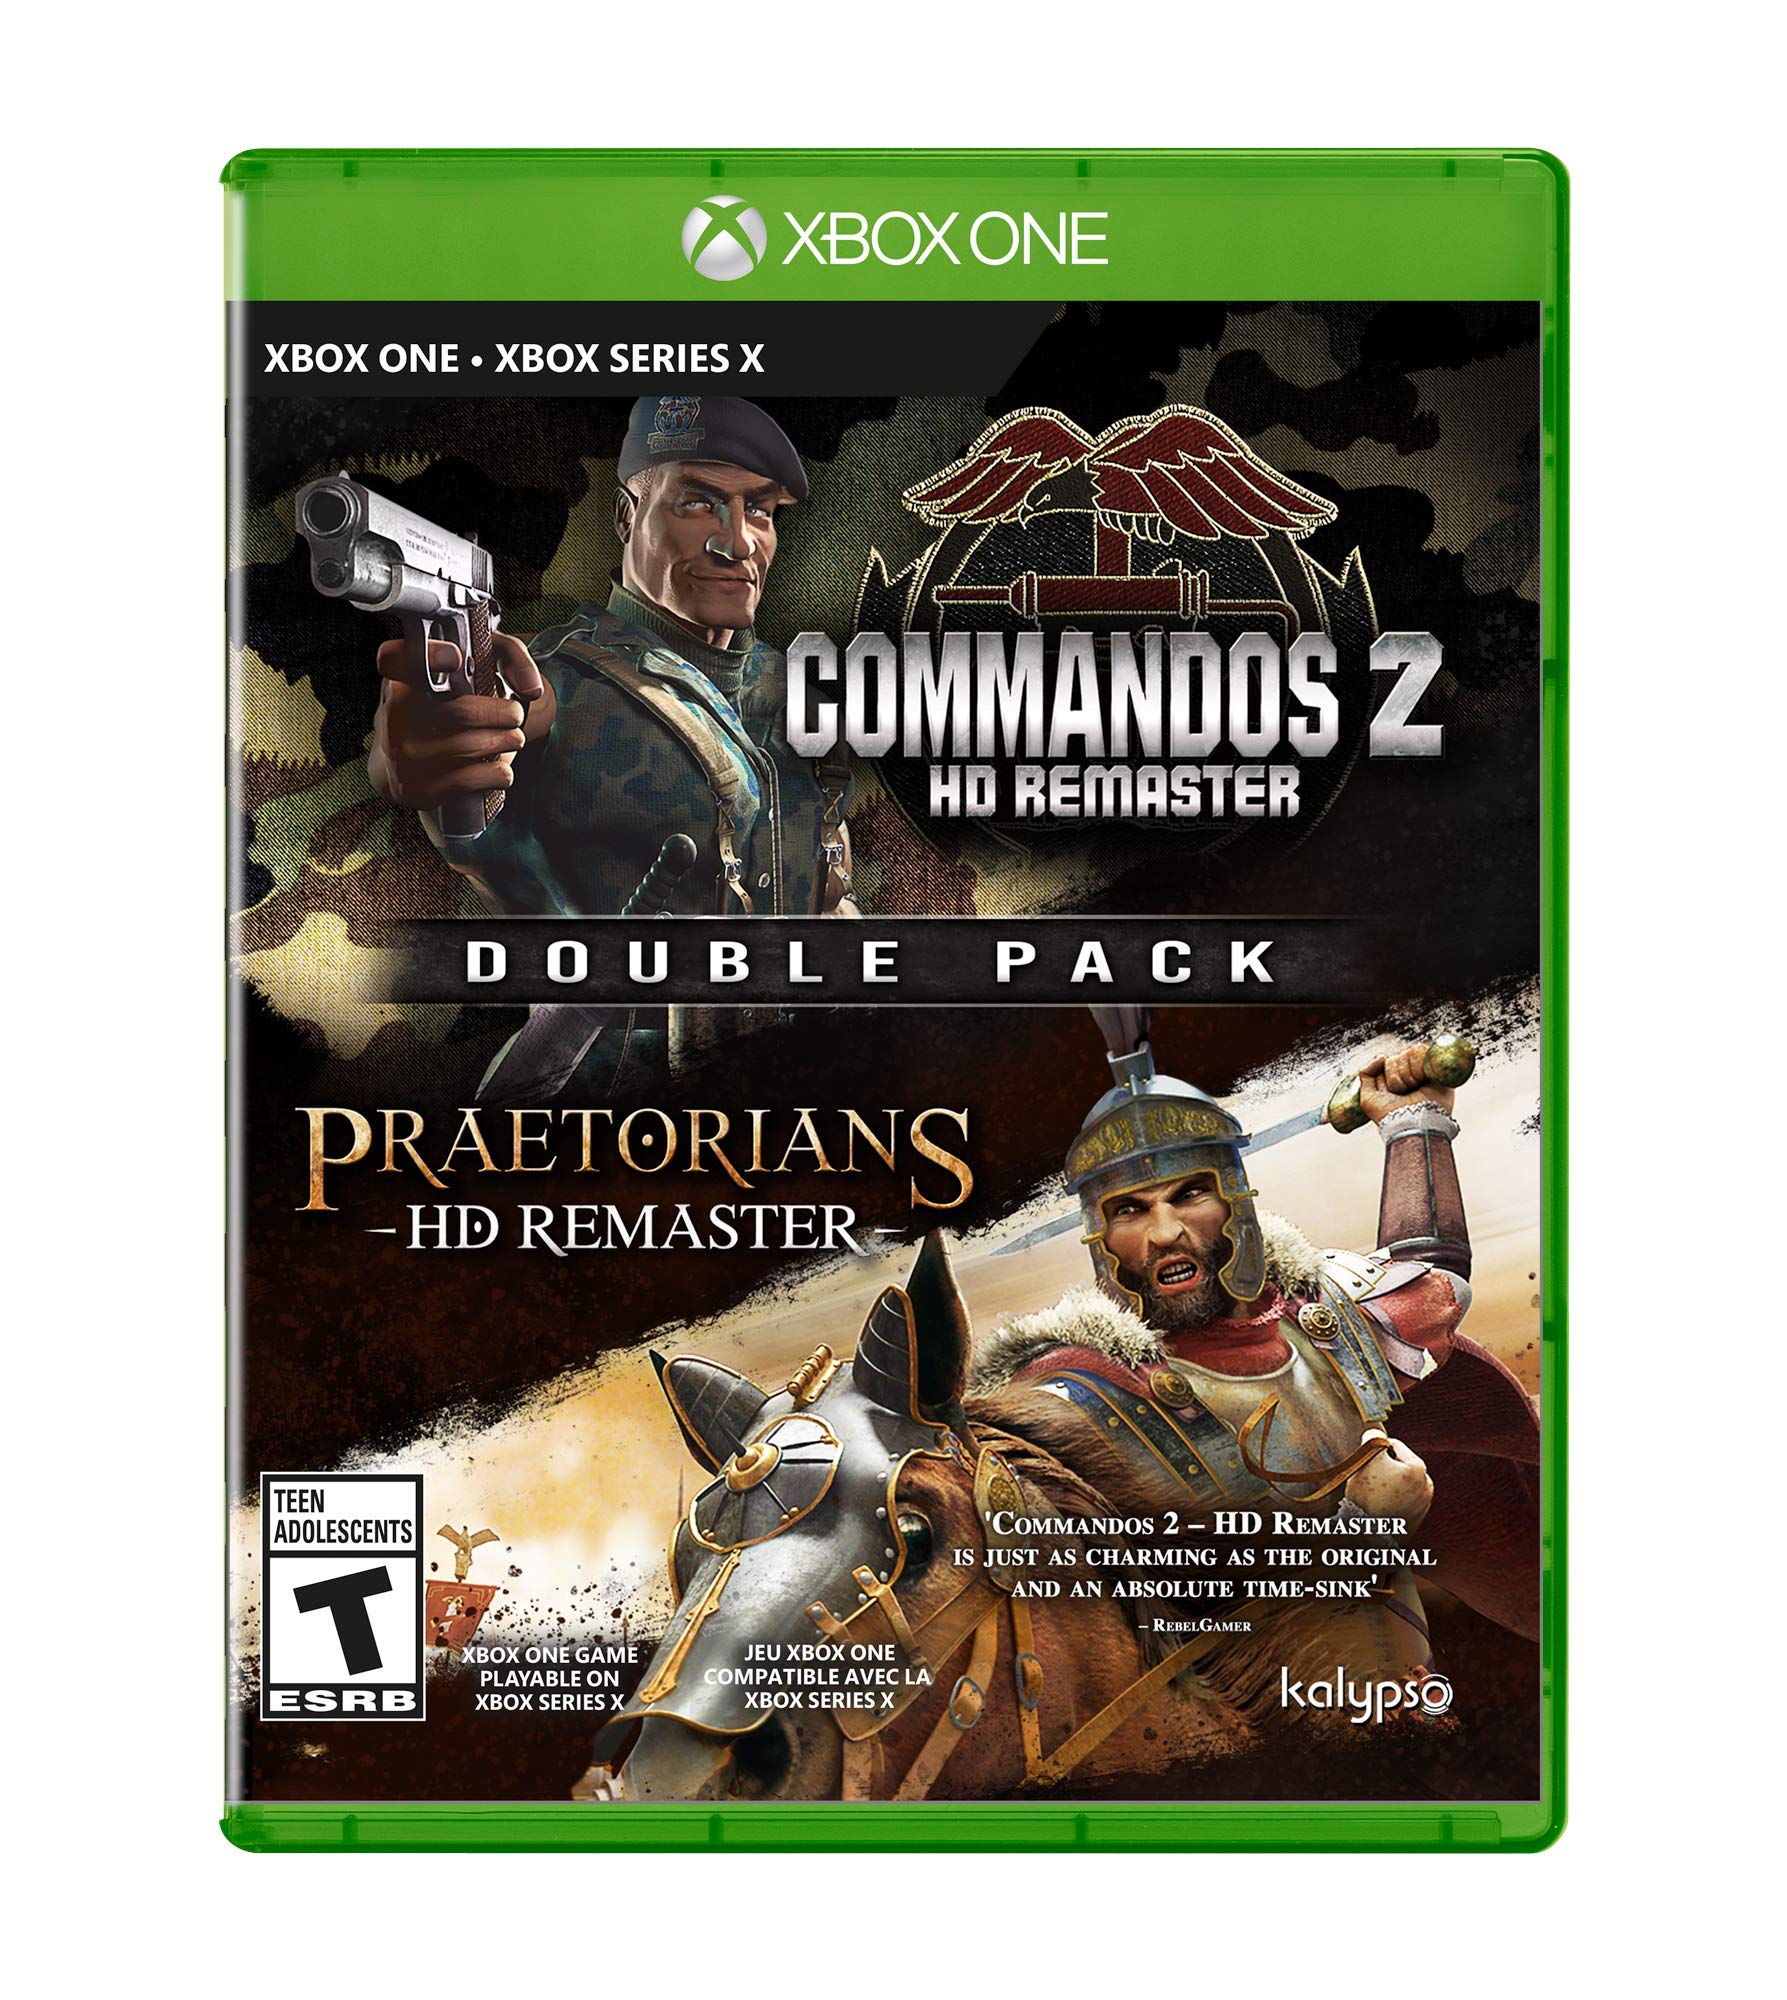 Deep Silver Commandos 2 & Praetorians: HD Remastered Double Pack - Xbox One - Xbox One